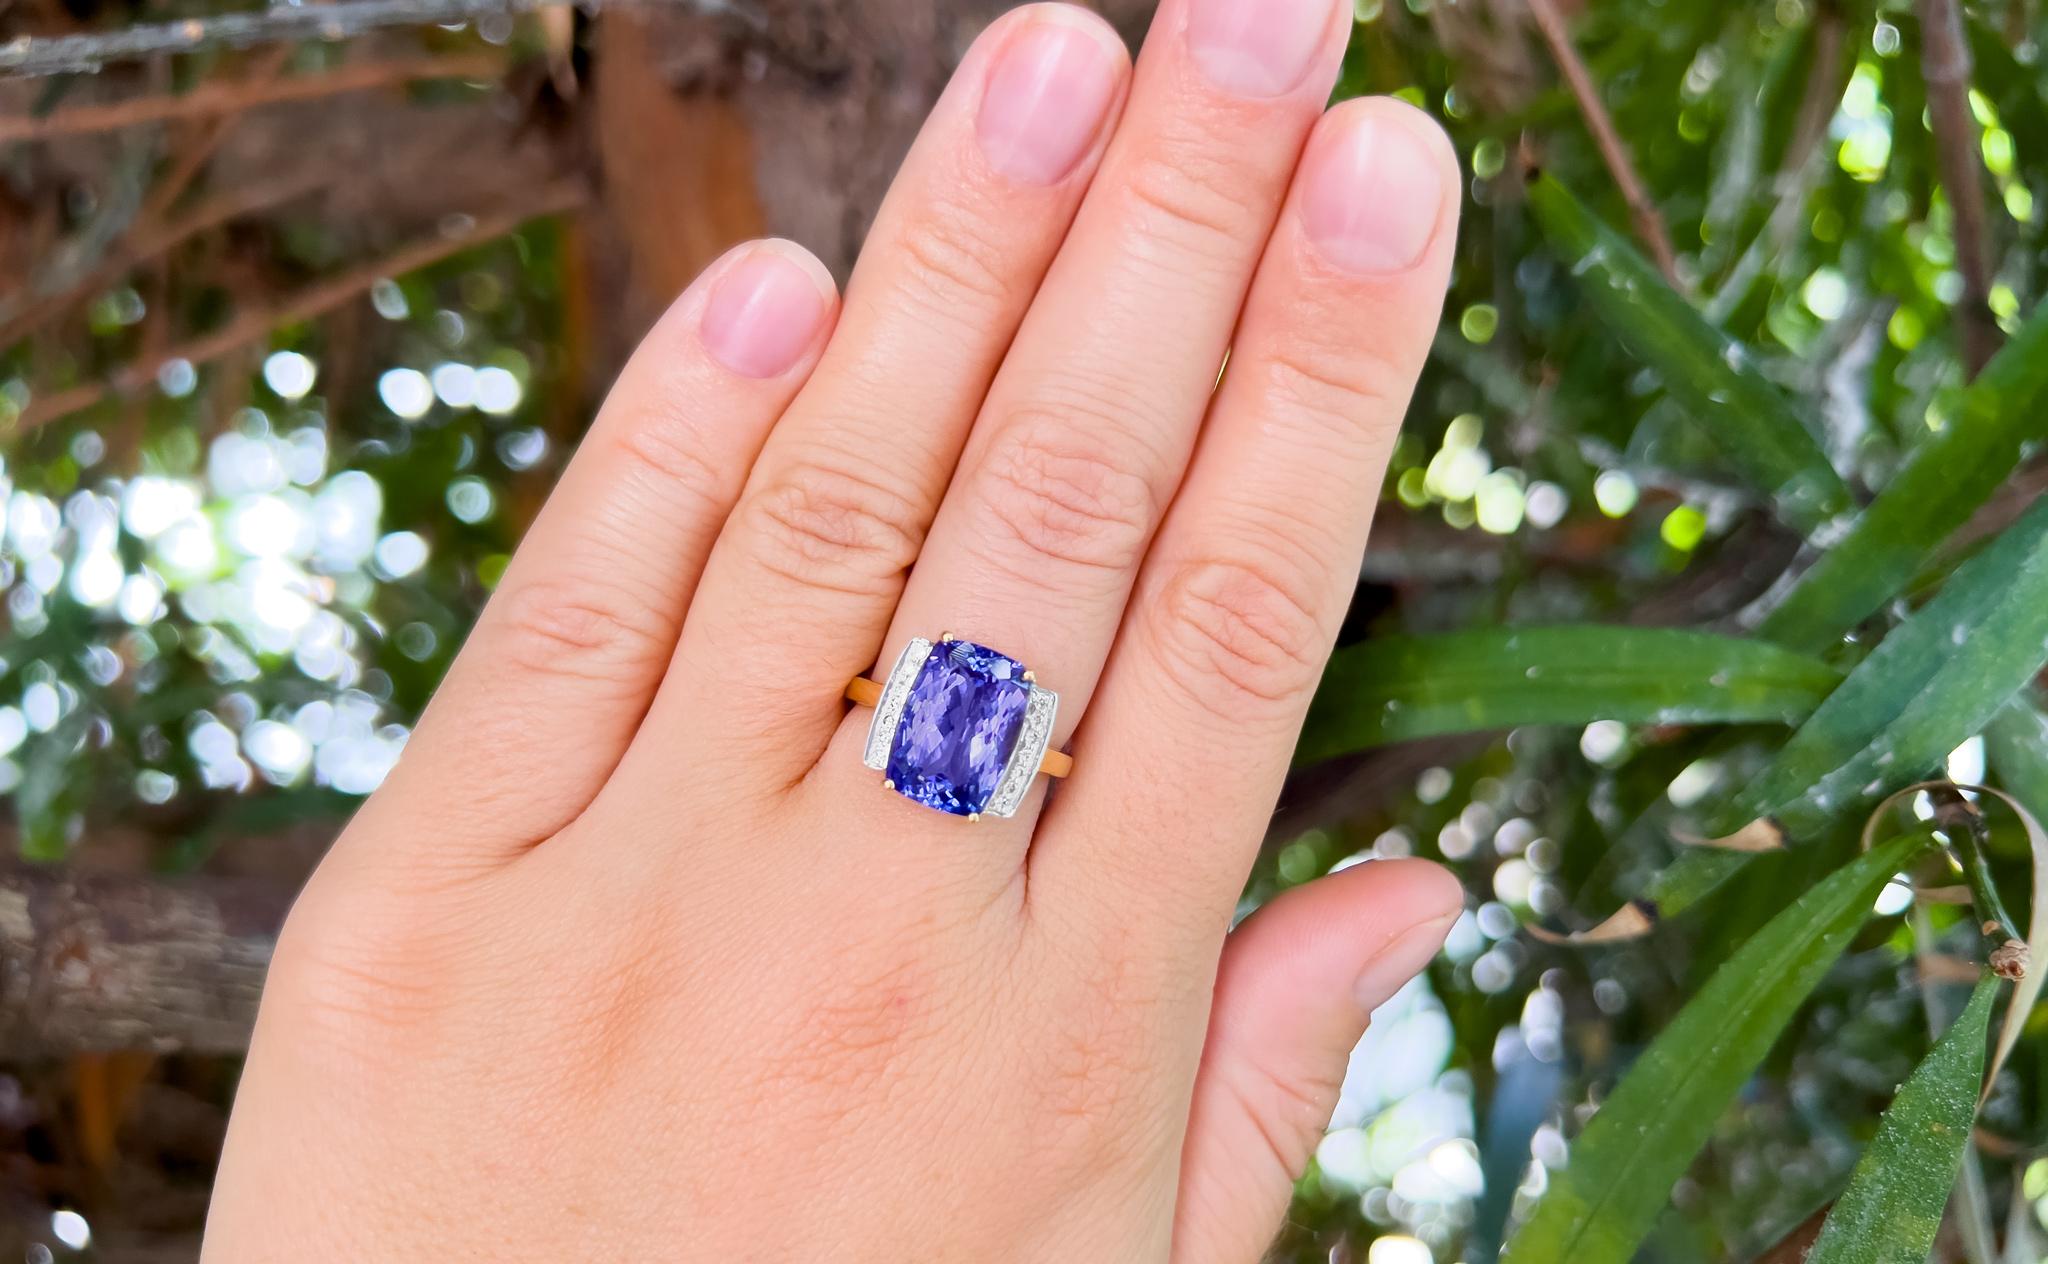 Tanzanite = 6.20 Carat
Stone Size: 13 x 9.5 x 5.8 mm
Cut: Cushion
14 Diamonds = 0.12 Carats
( Clarity: VS; Color: H )
Metal: 18K Yellow & White Gold
Ring Size: 7* US
*It can be resized complimentary